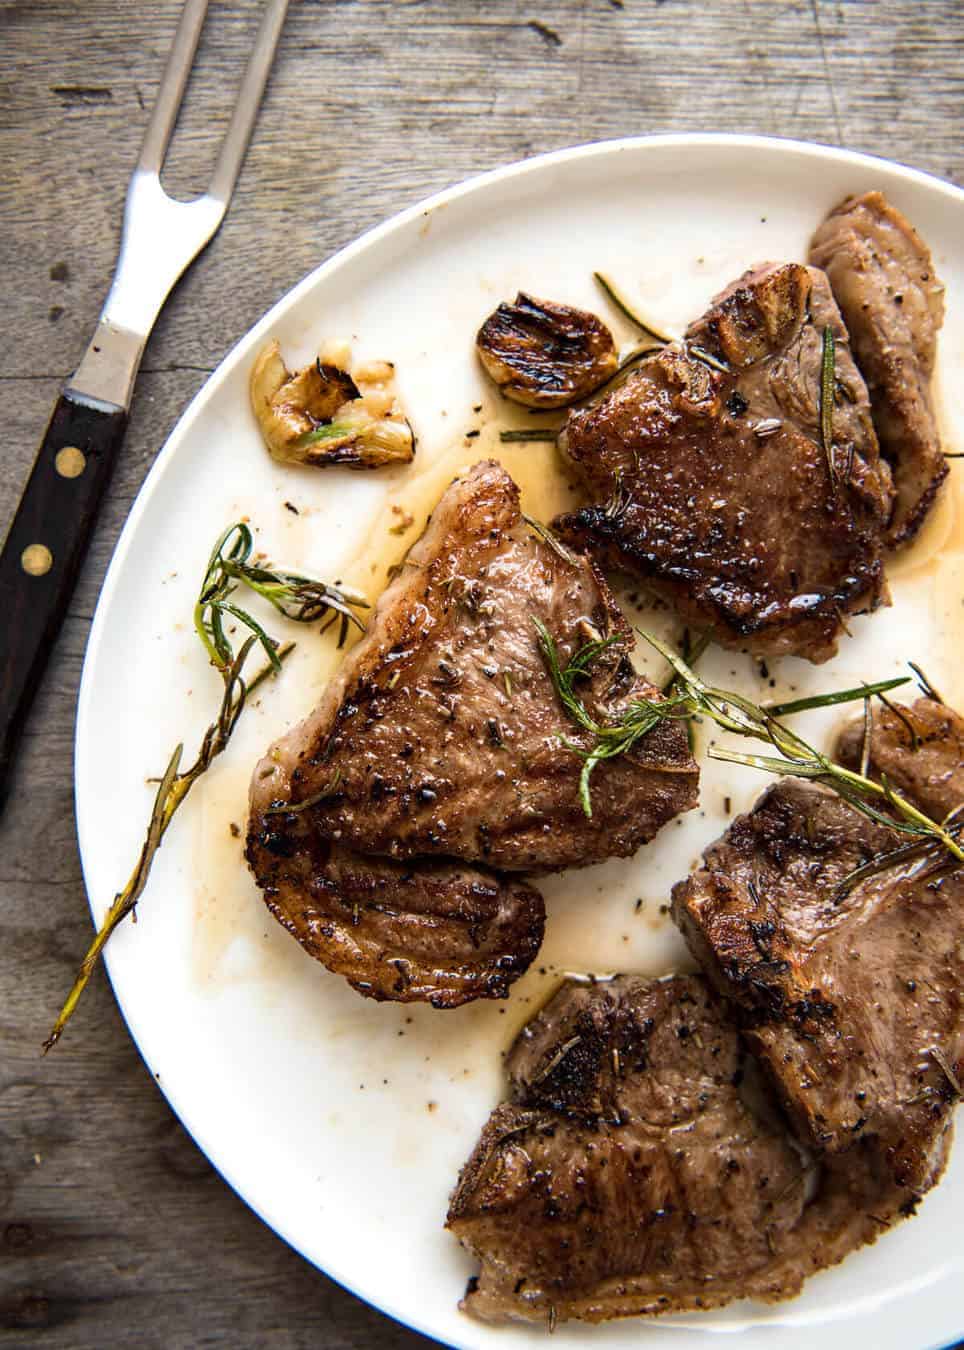 Rosemary Garlic Grilled Lamb Chops - A simple marinade infuses this with fantastic flavour! Use the marinade for any quick-cooking cut of lamb - chops or steaks. recipetineats.com